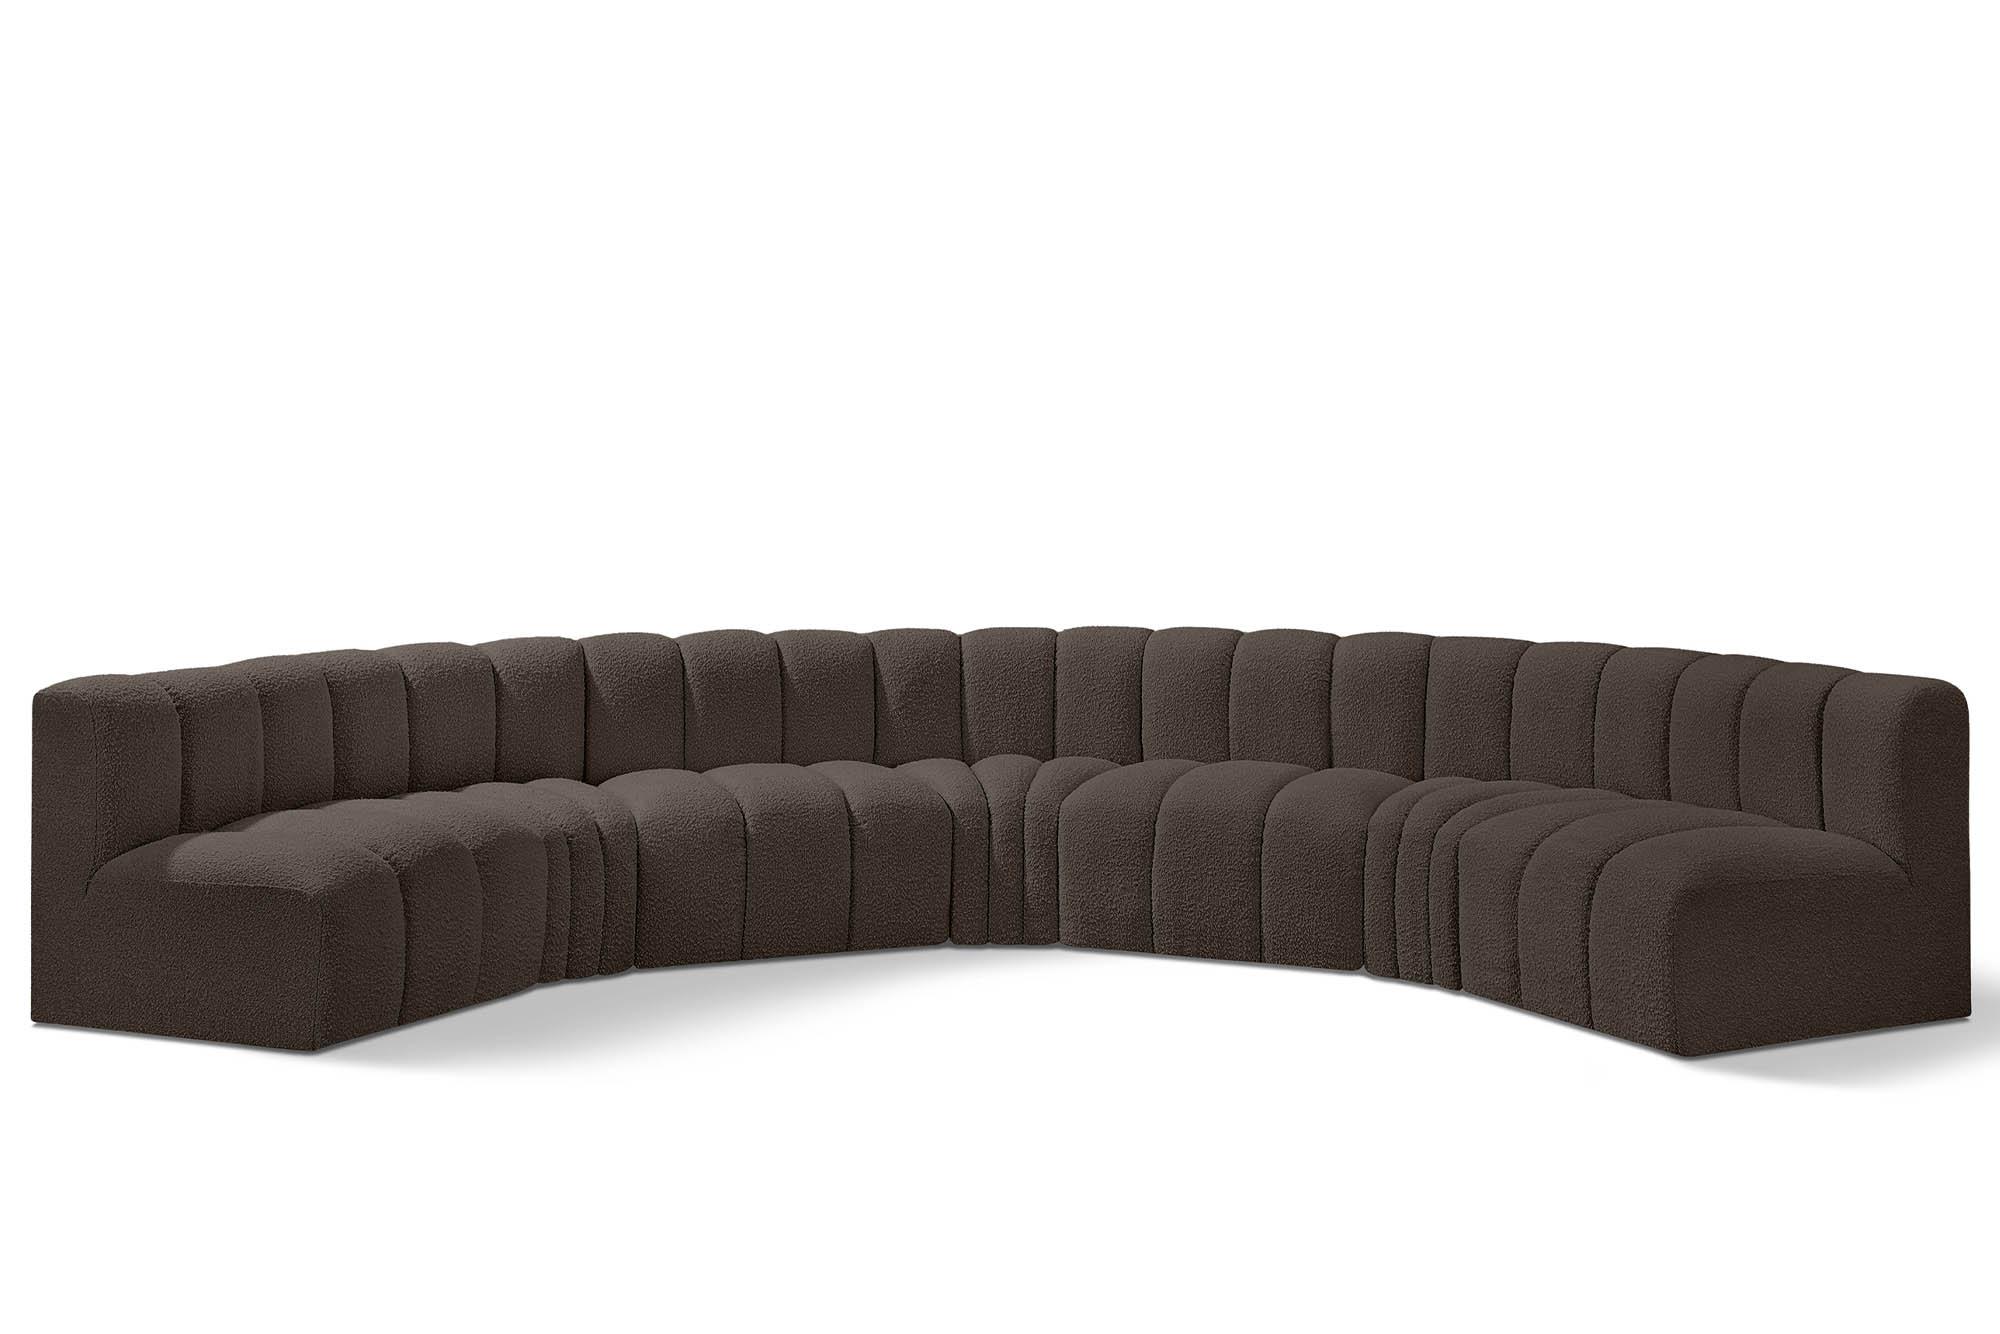 Contemporary, Modern Modular Sectional Sofa ARC 102Brown-S7B 102Brown-S7B in Brown 